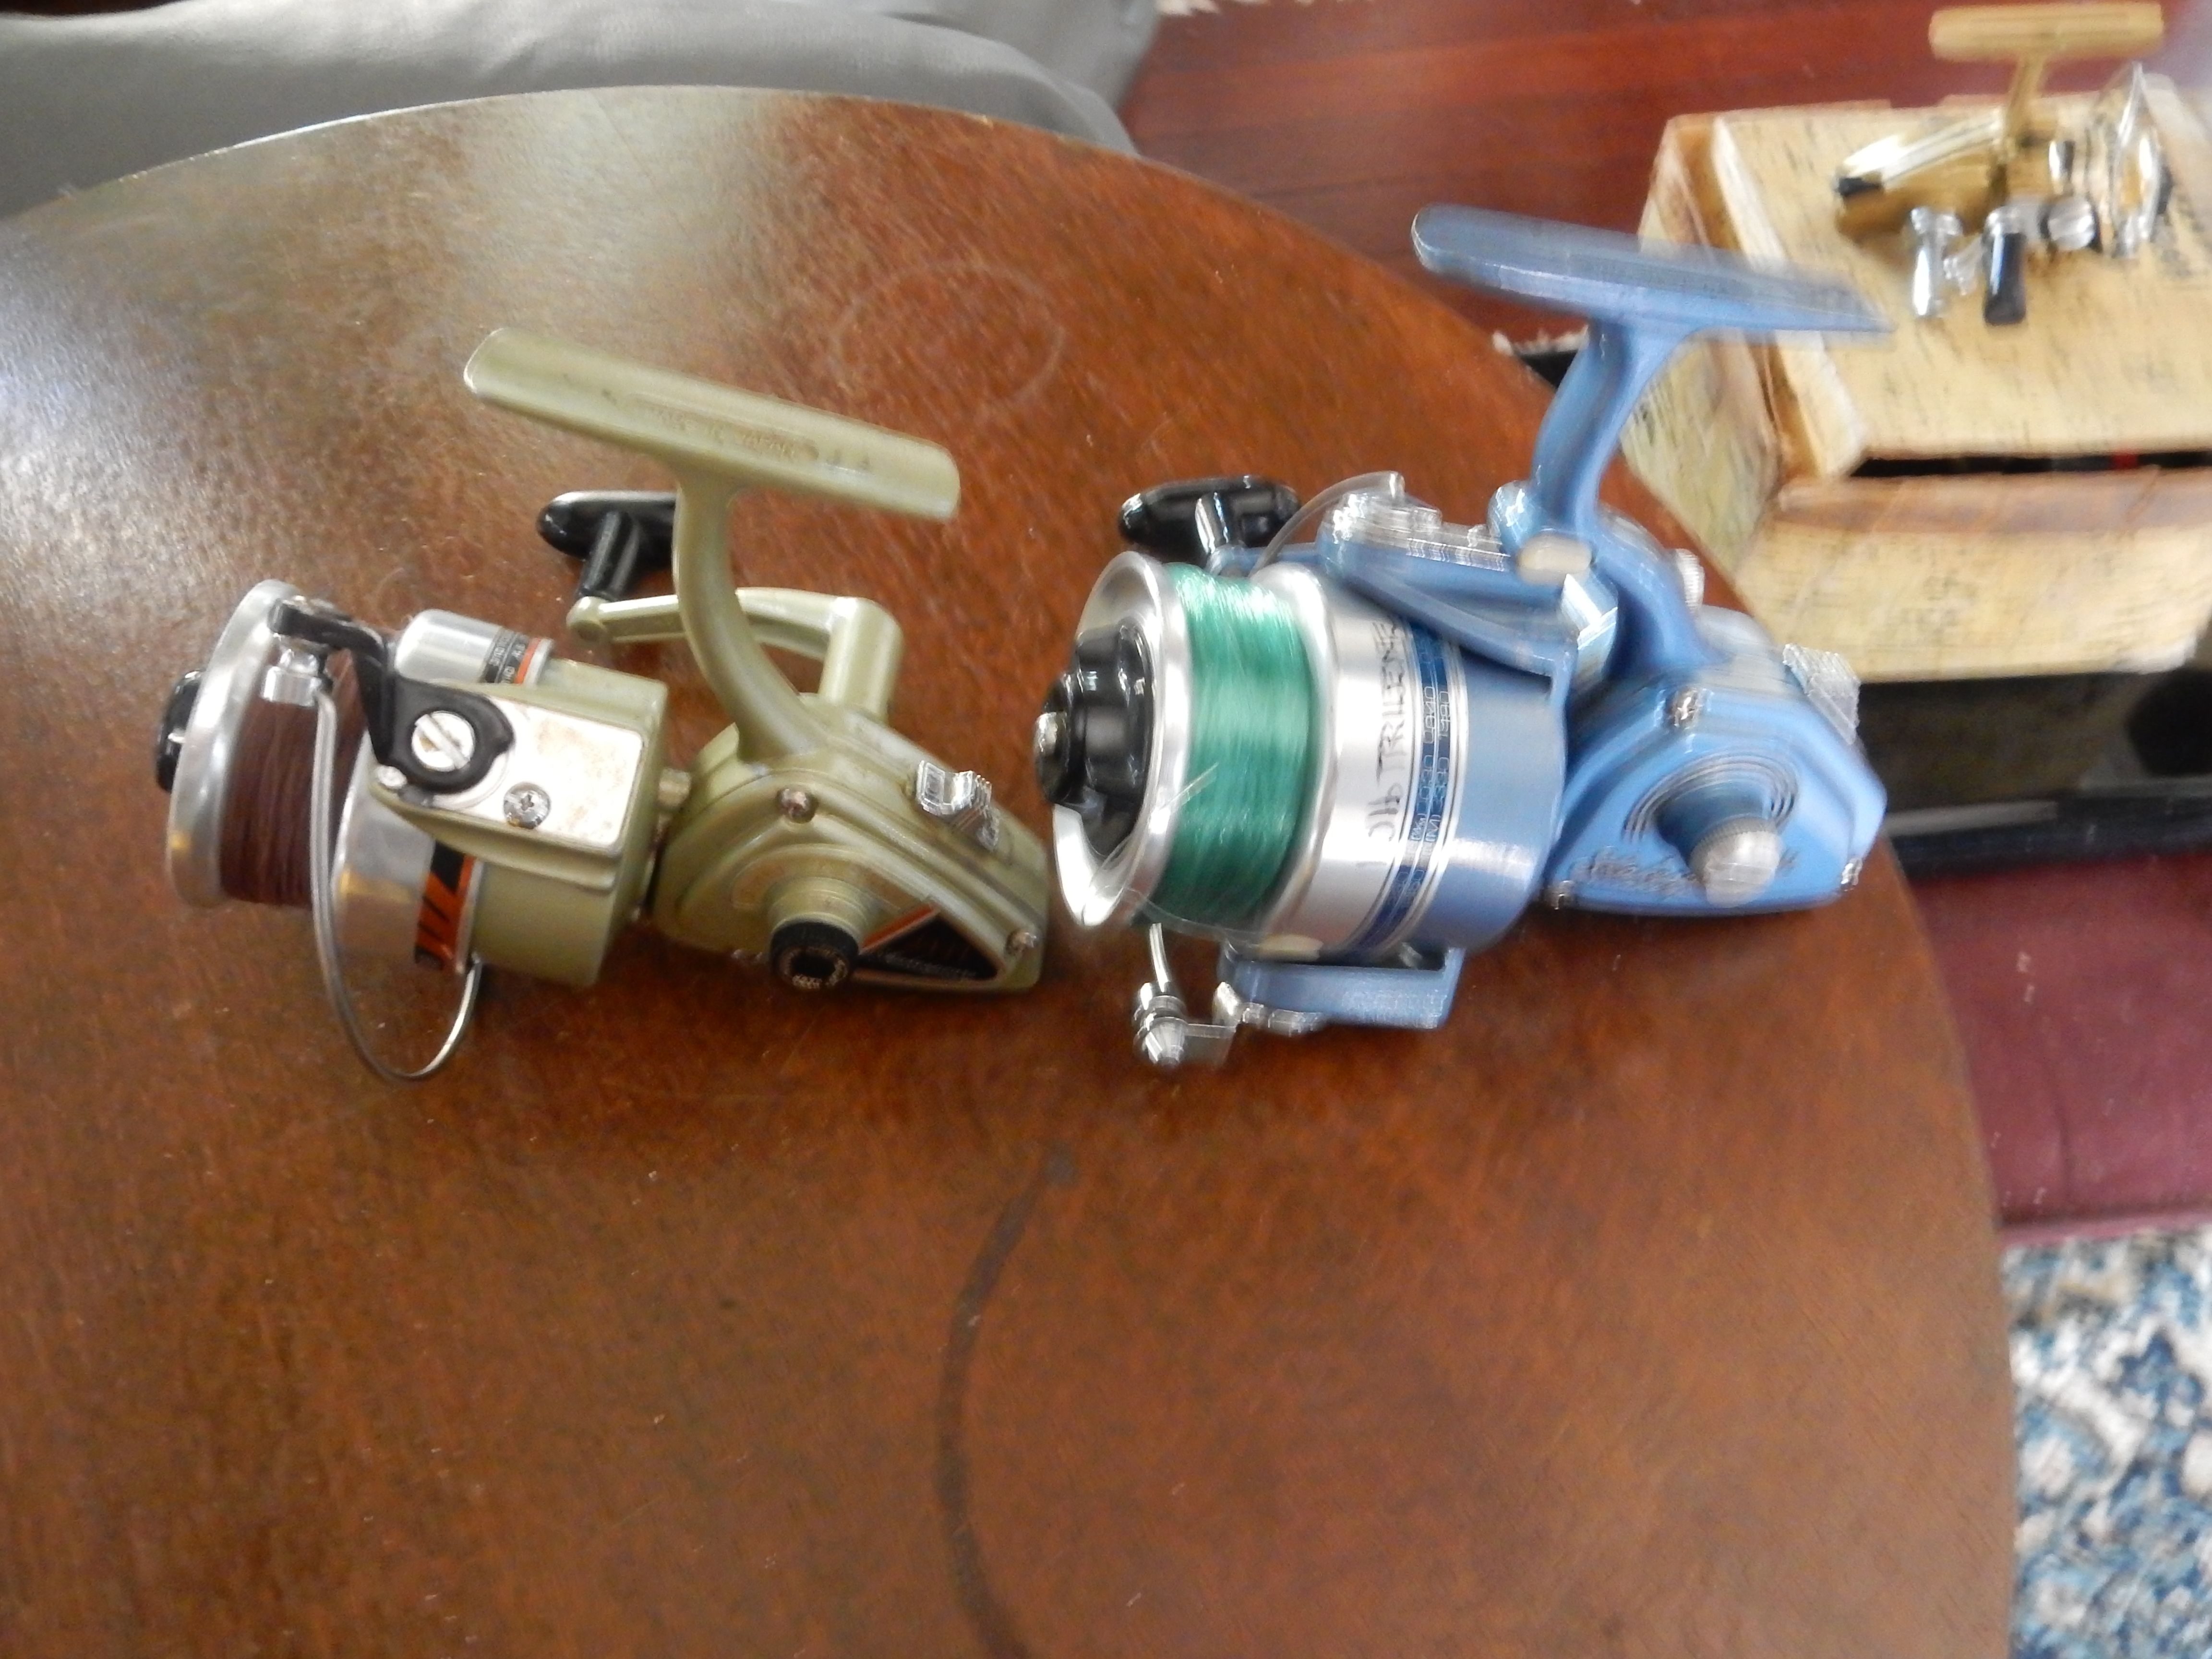 I have this Shakespeare 2499 fishing reel, are these still any